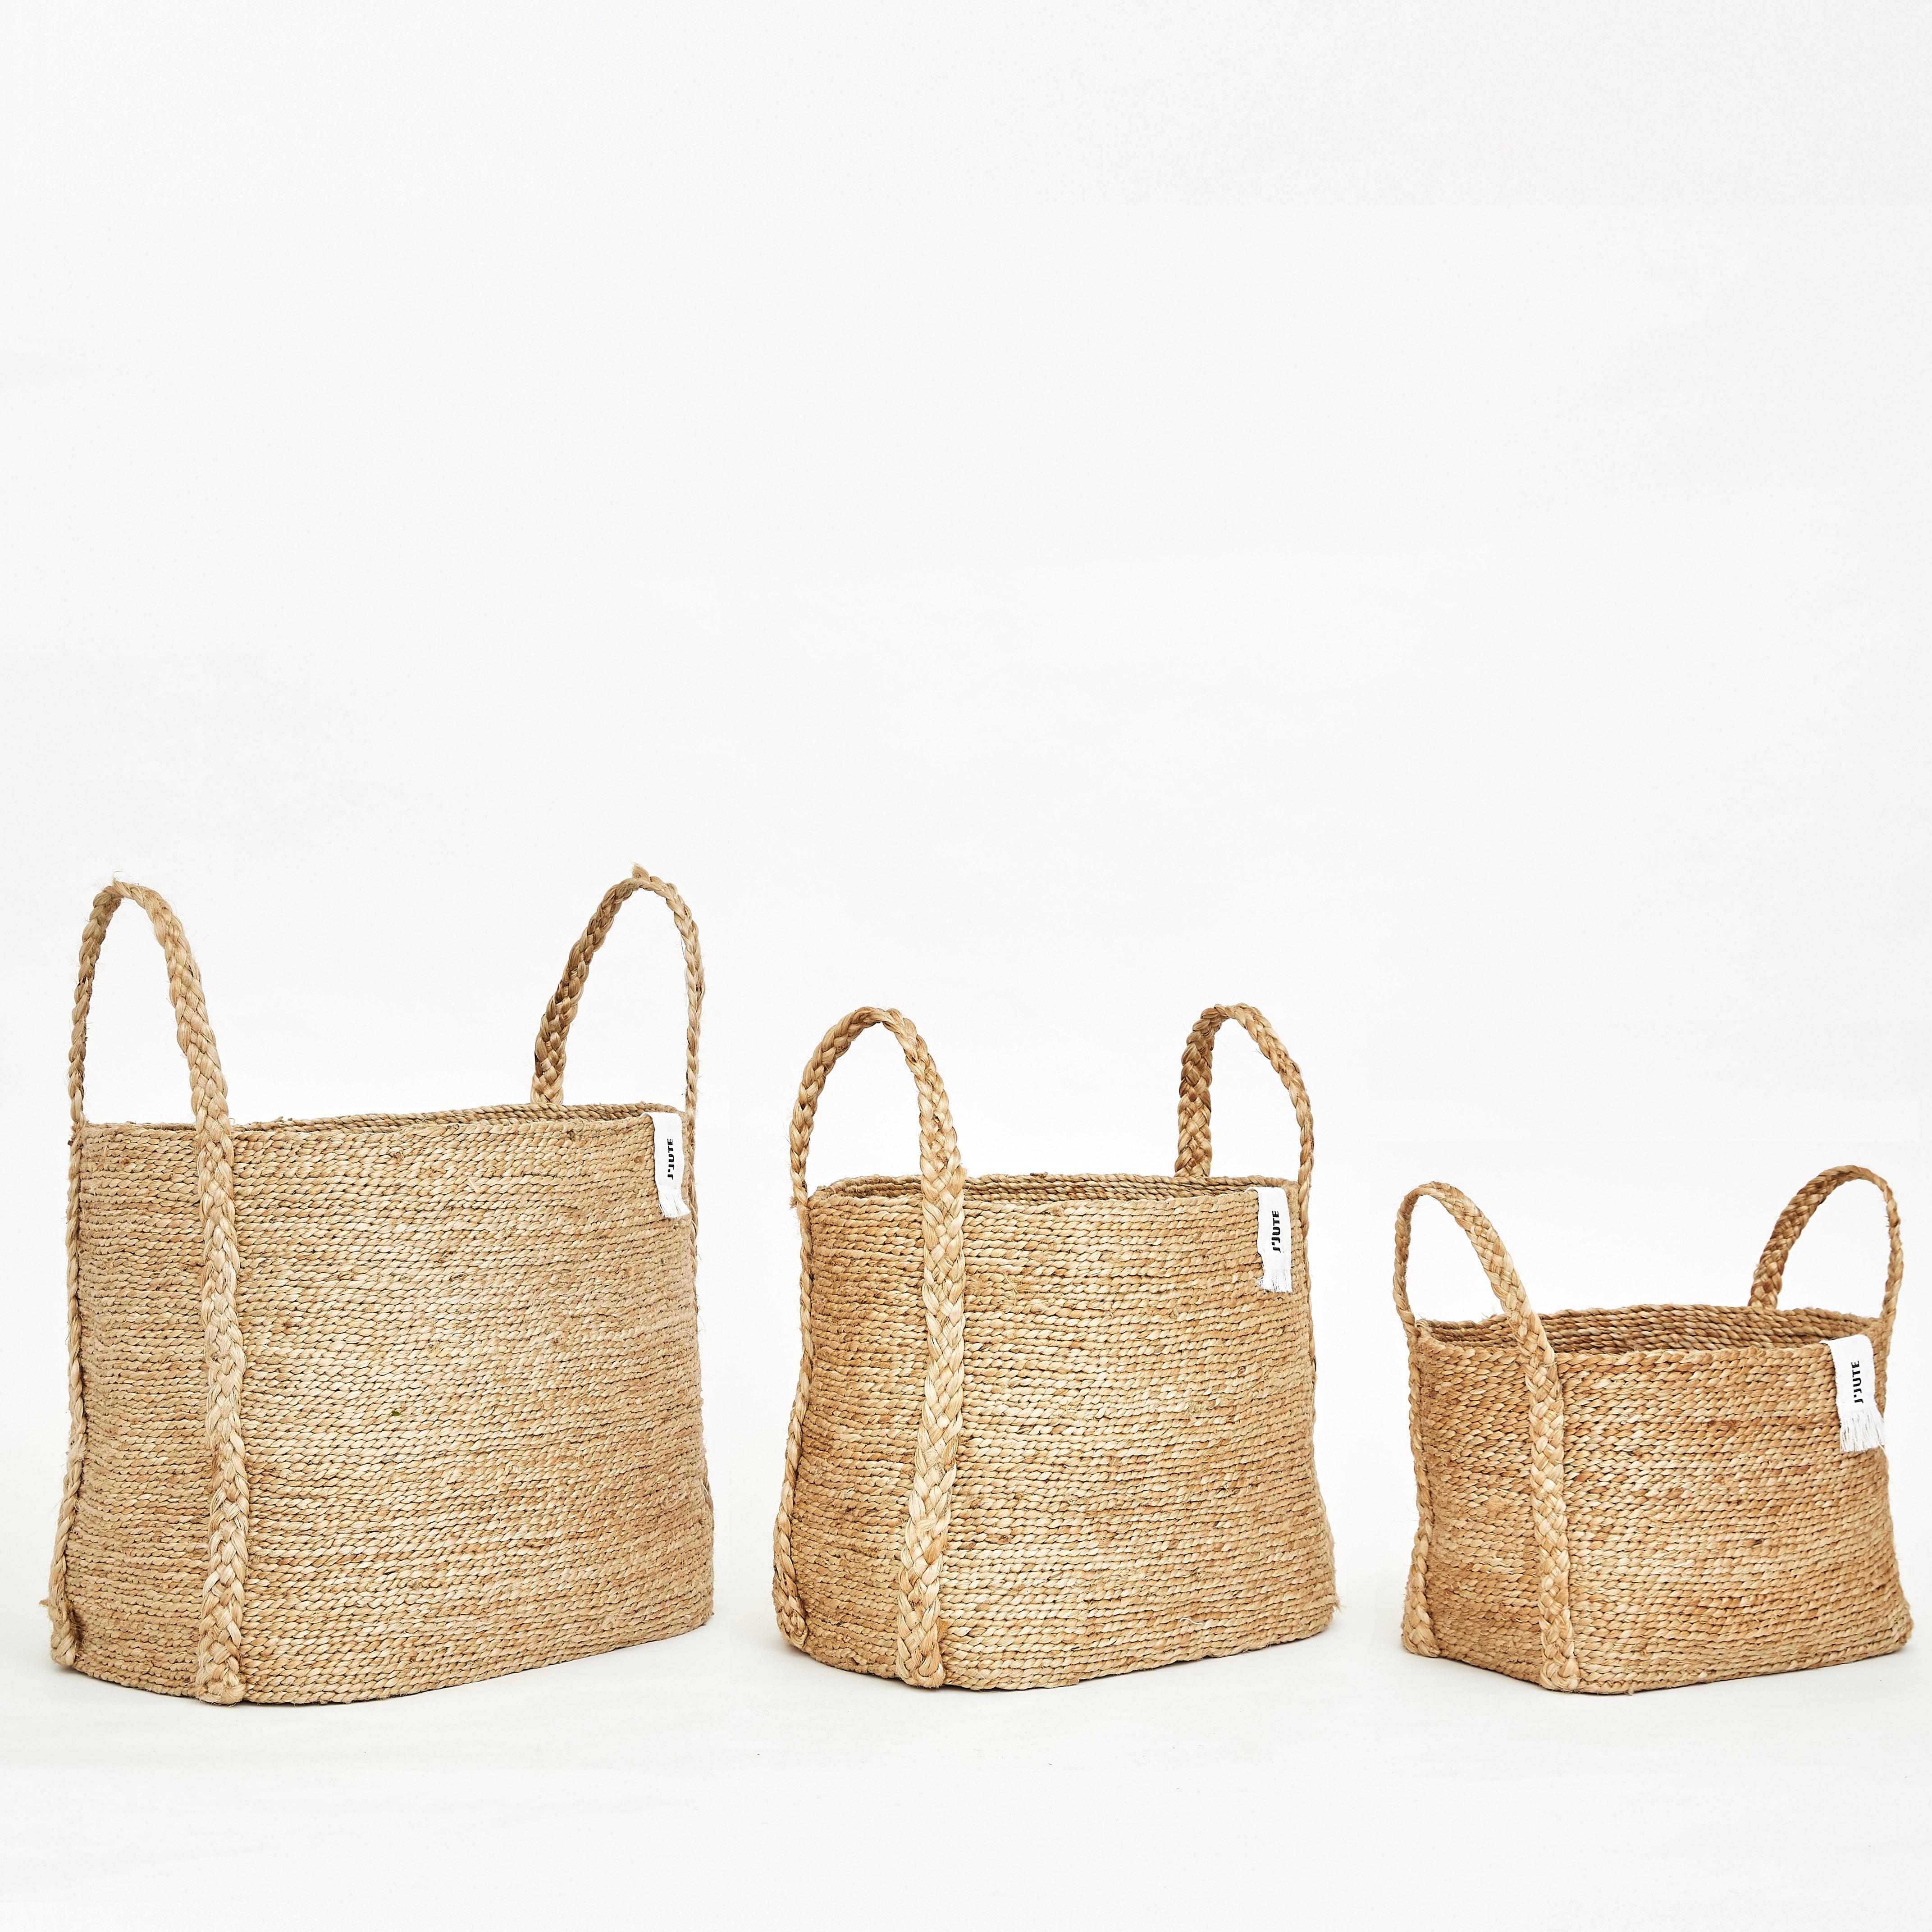 J'Jute is a luxury all-natural, sustainable brand based in Bondi Beach, Australia. Each piece is designed in Australia and handwoven by skilled artisans in India. 

Product Information
Colour: Natural Jute
Material: Natural Jute- a soft durable